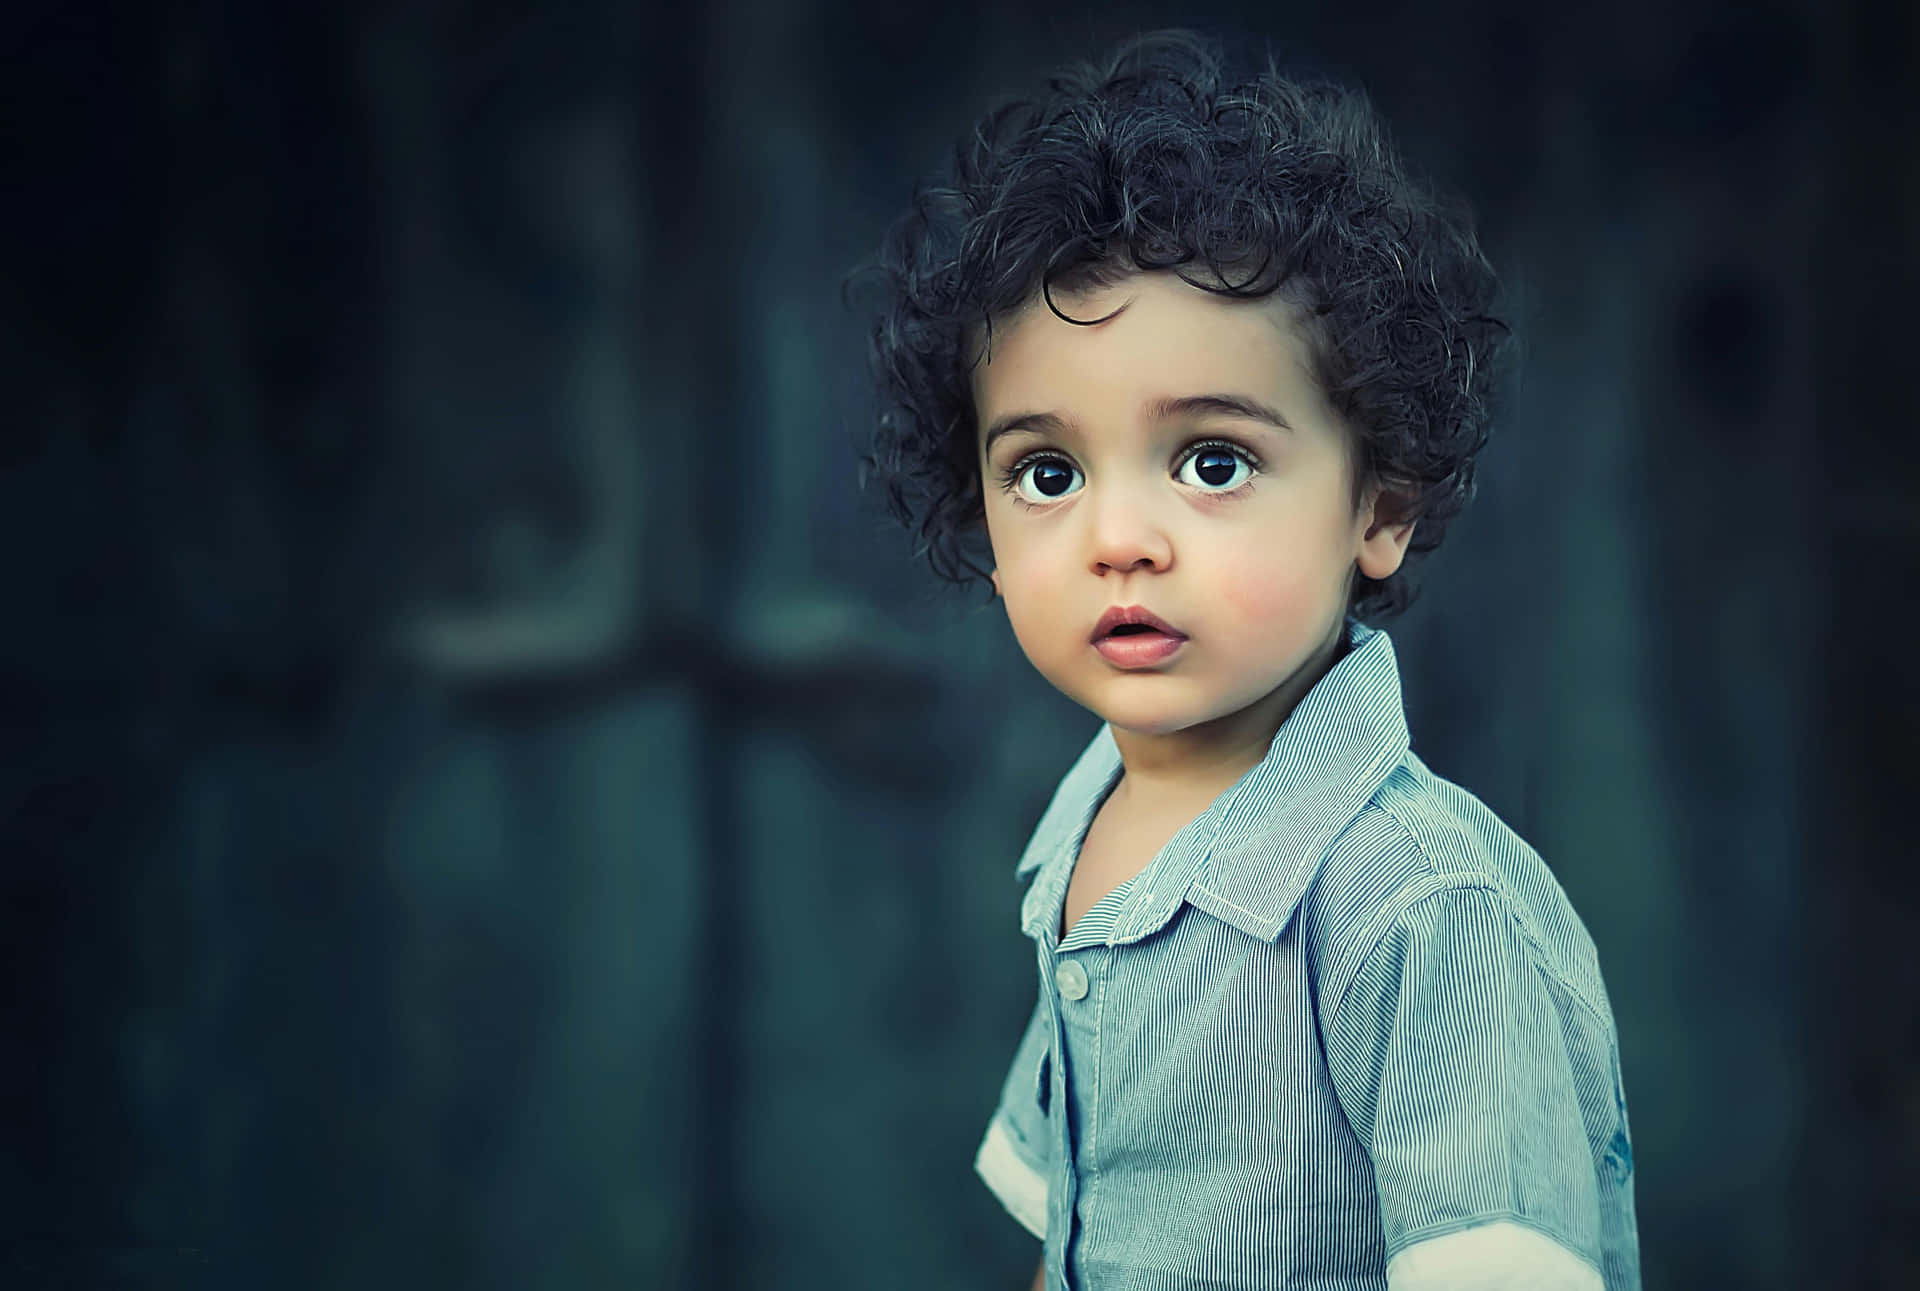 Curly Haired Toddler Portrait Wallpaper